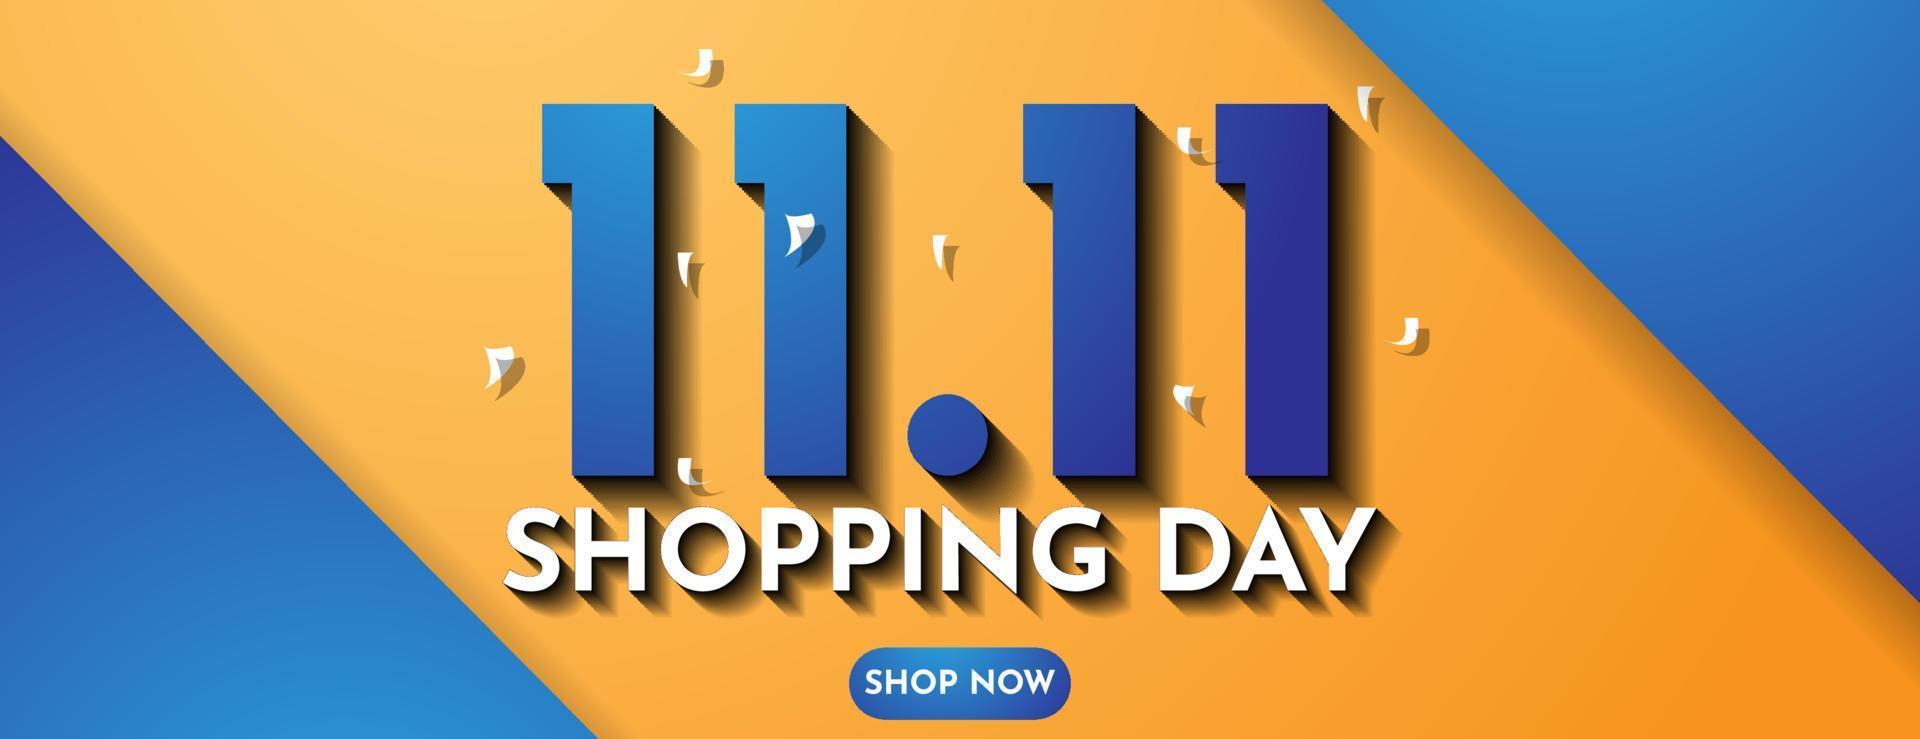 11.11 shopping day banner background design in blue and orange color vector